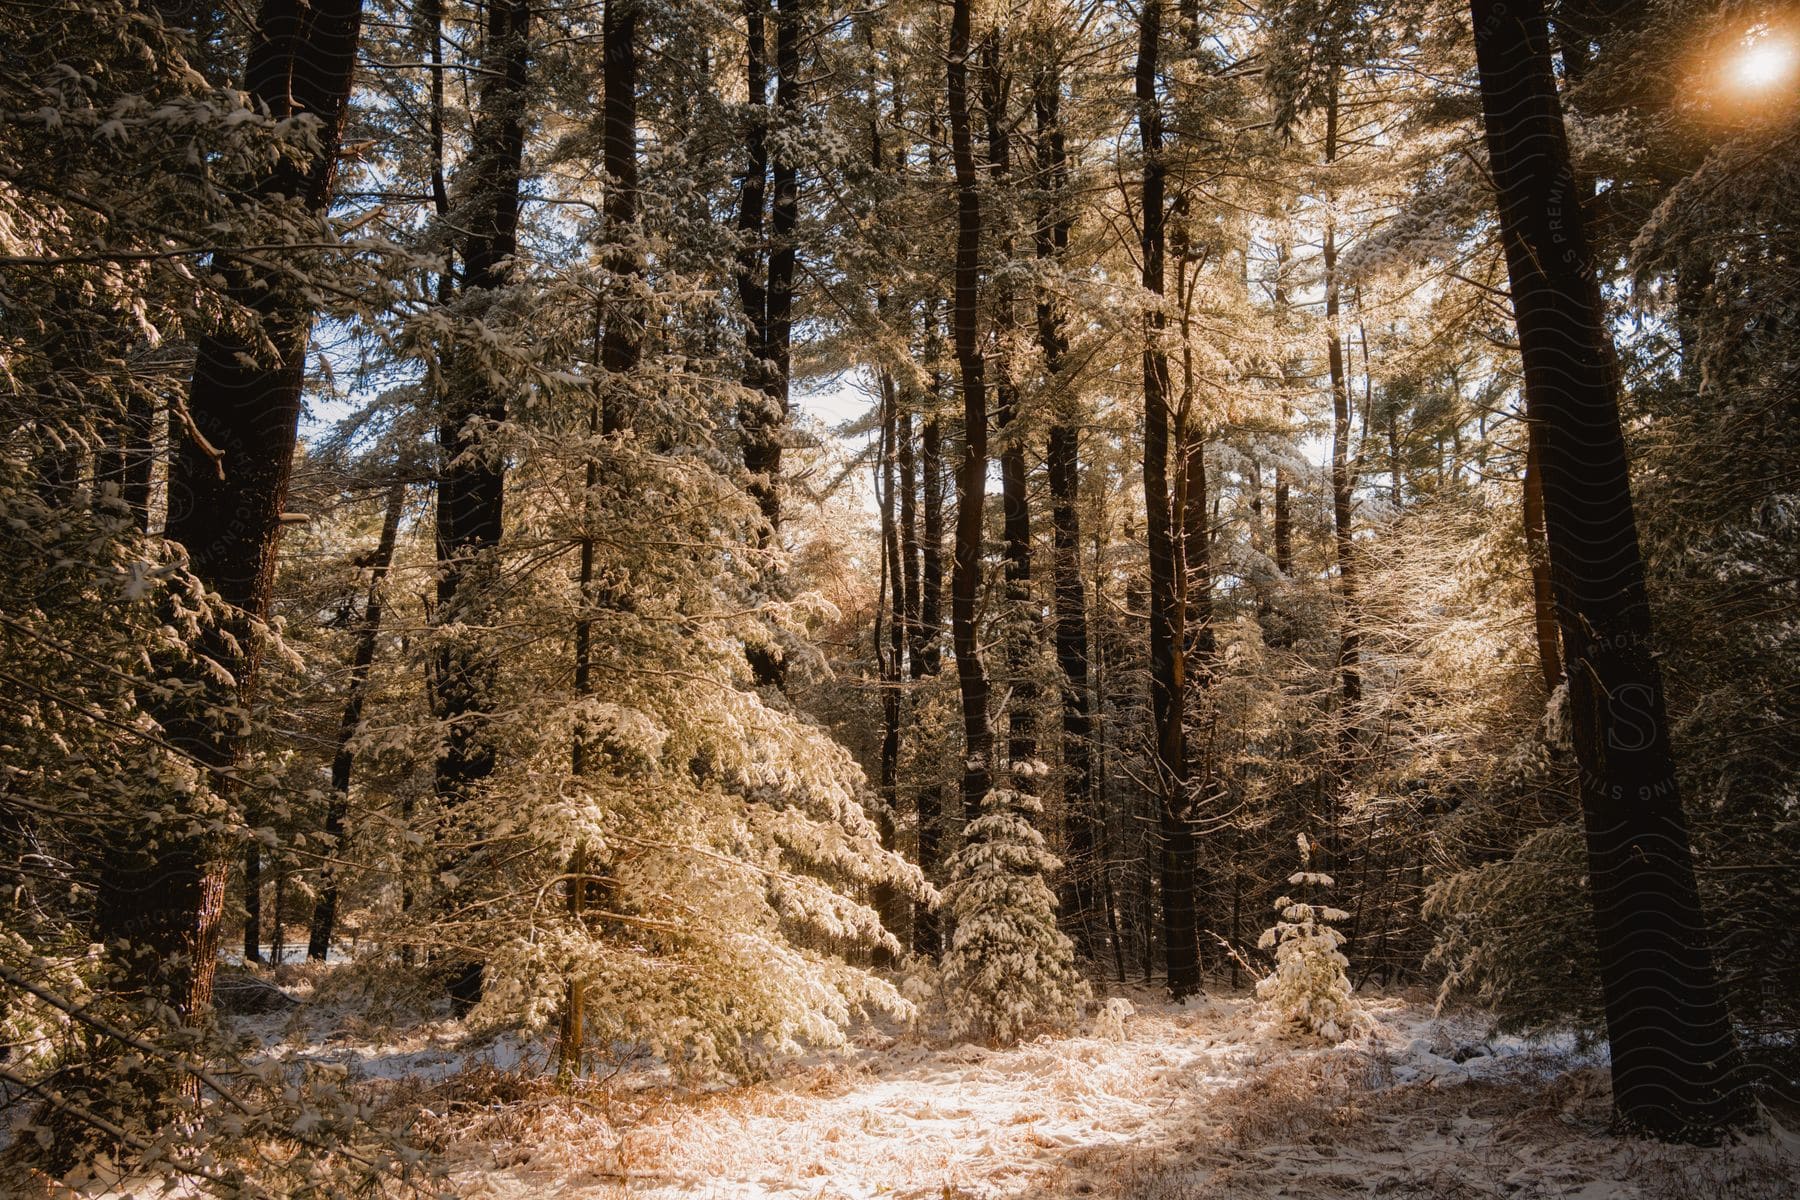 Sun shines through trees of snowy conifer forest in winter.